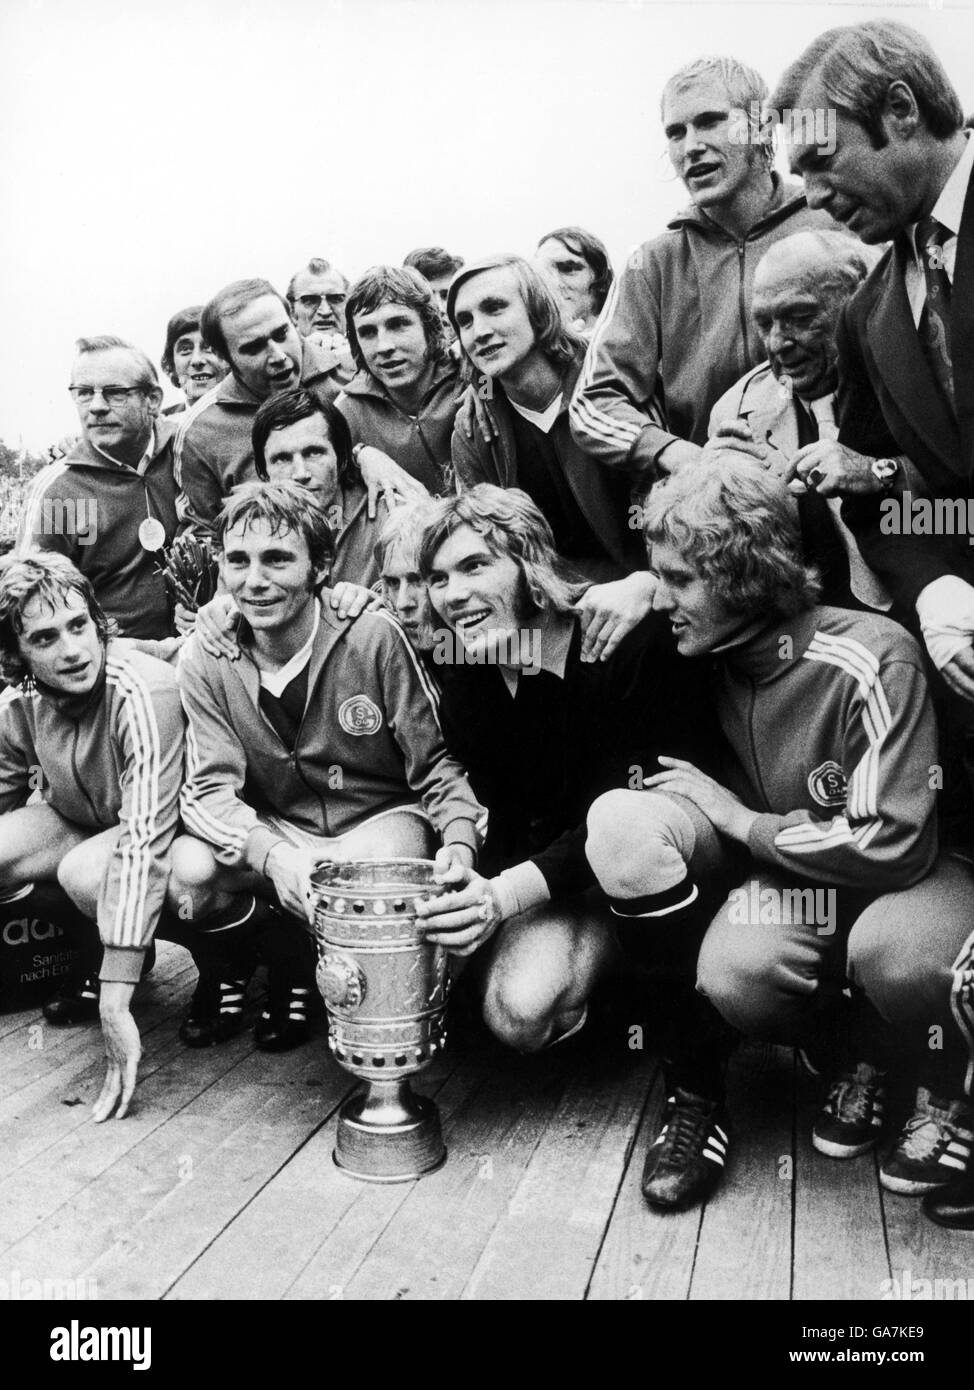 Schalke 04 celebrate with the German Cup after their 5-0 victory, featuring Rolf Russman (top, second r), Klaus Fischer (back row, third l), goalkeeper Norbert Nigbur (front row, second r) and Reinhard Libuda (front row, second l) Stock Photo